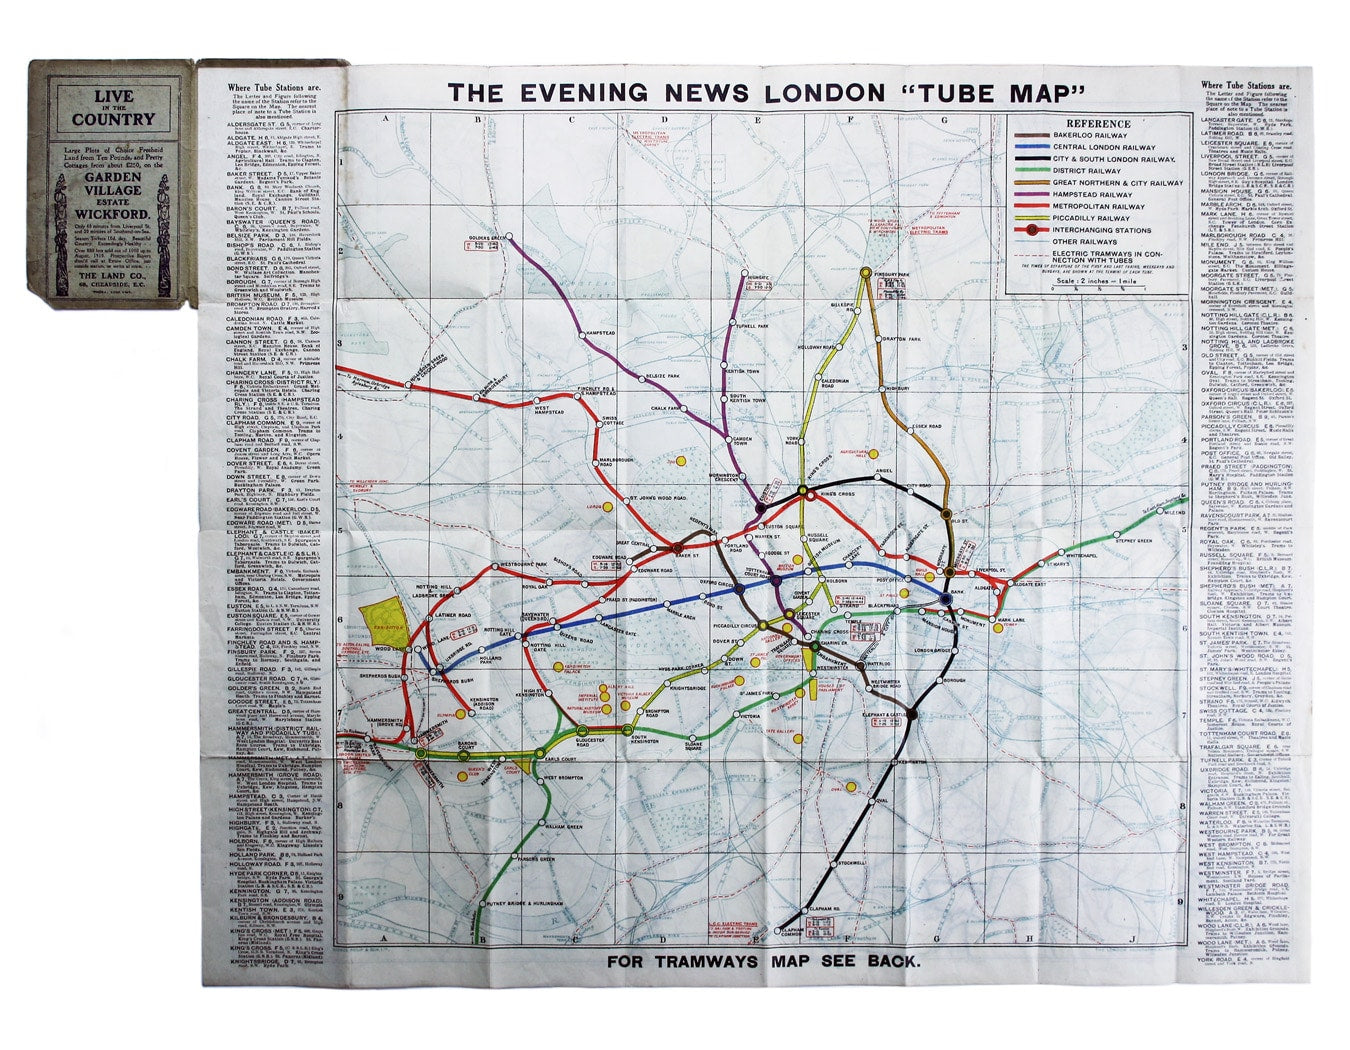 The Evening News Tube Map of London